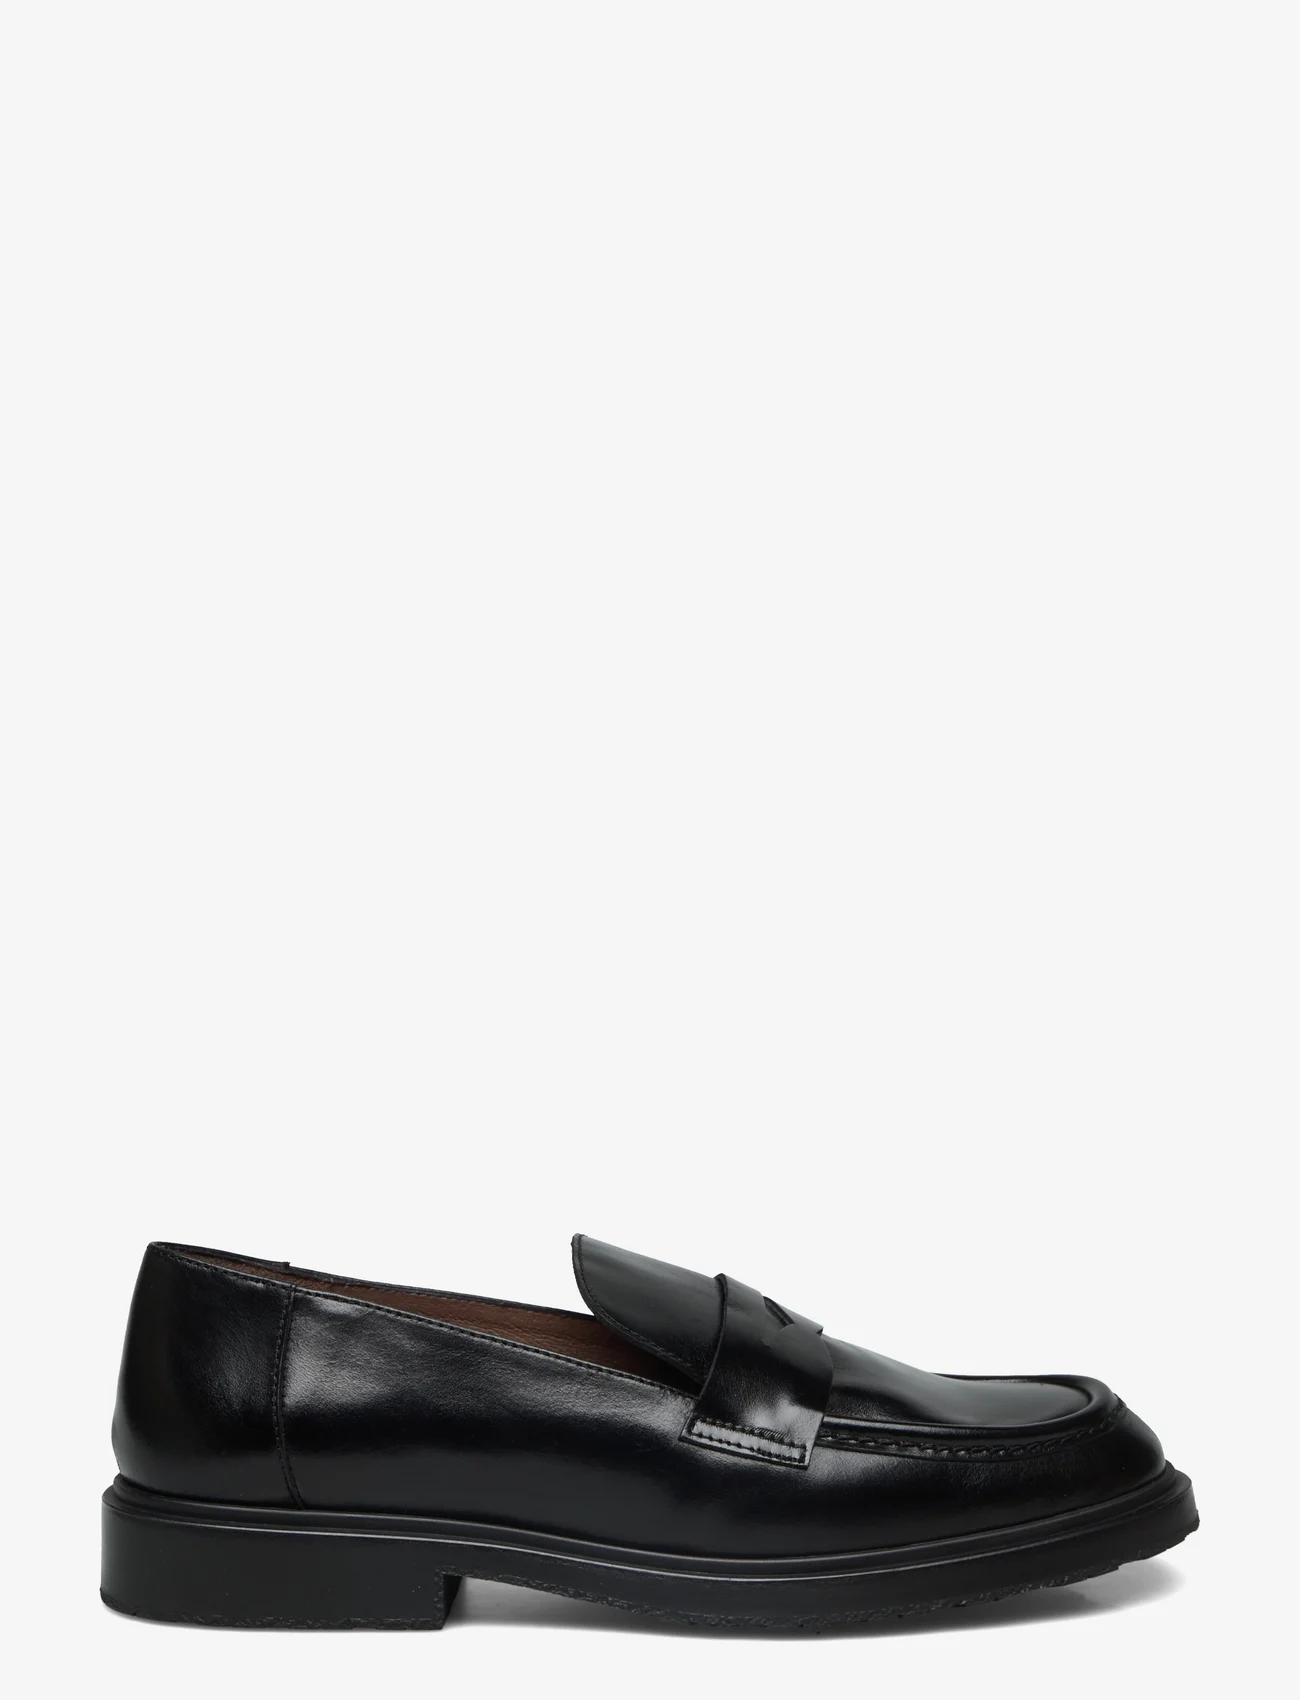 Wonders - NED - spring shoes - negro - 1